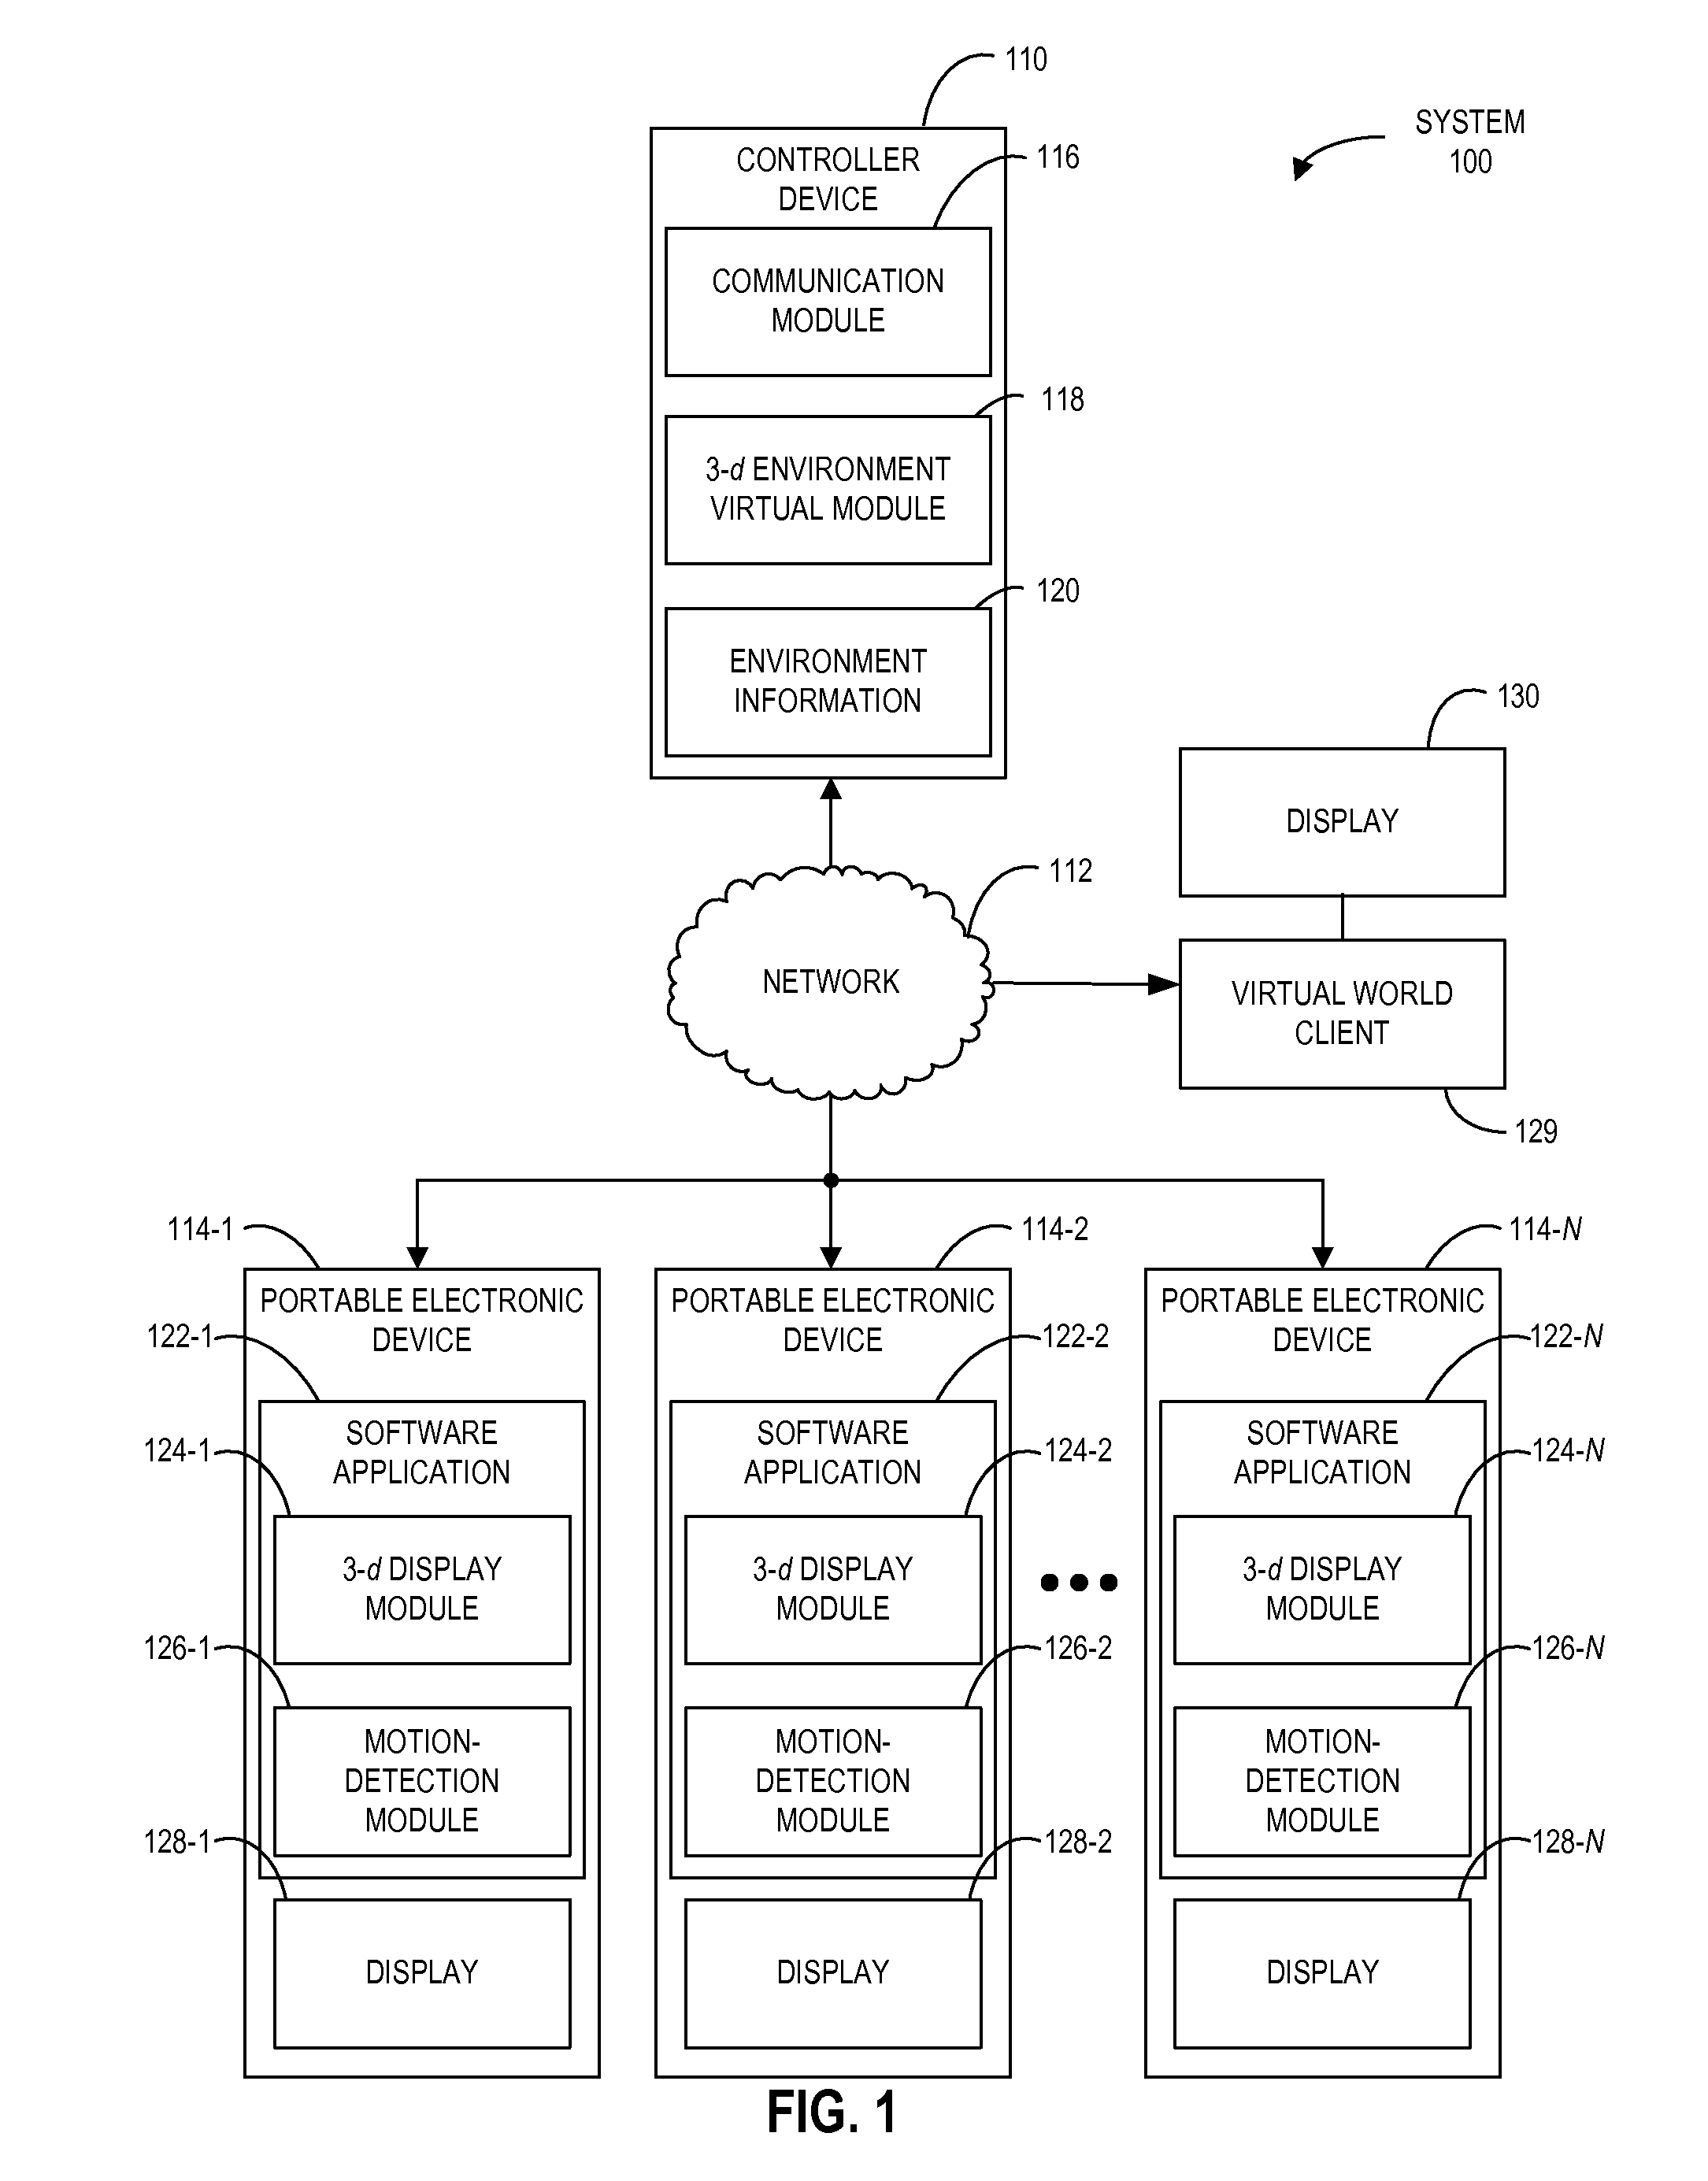 System for interacting with objects in a virtual environment